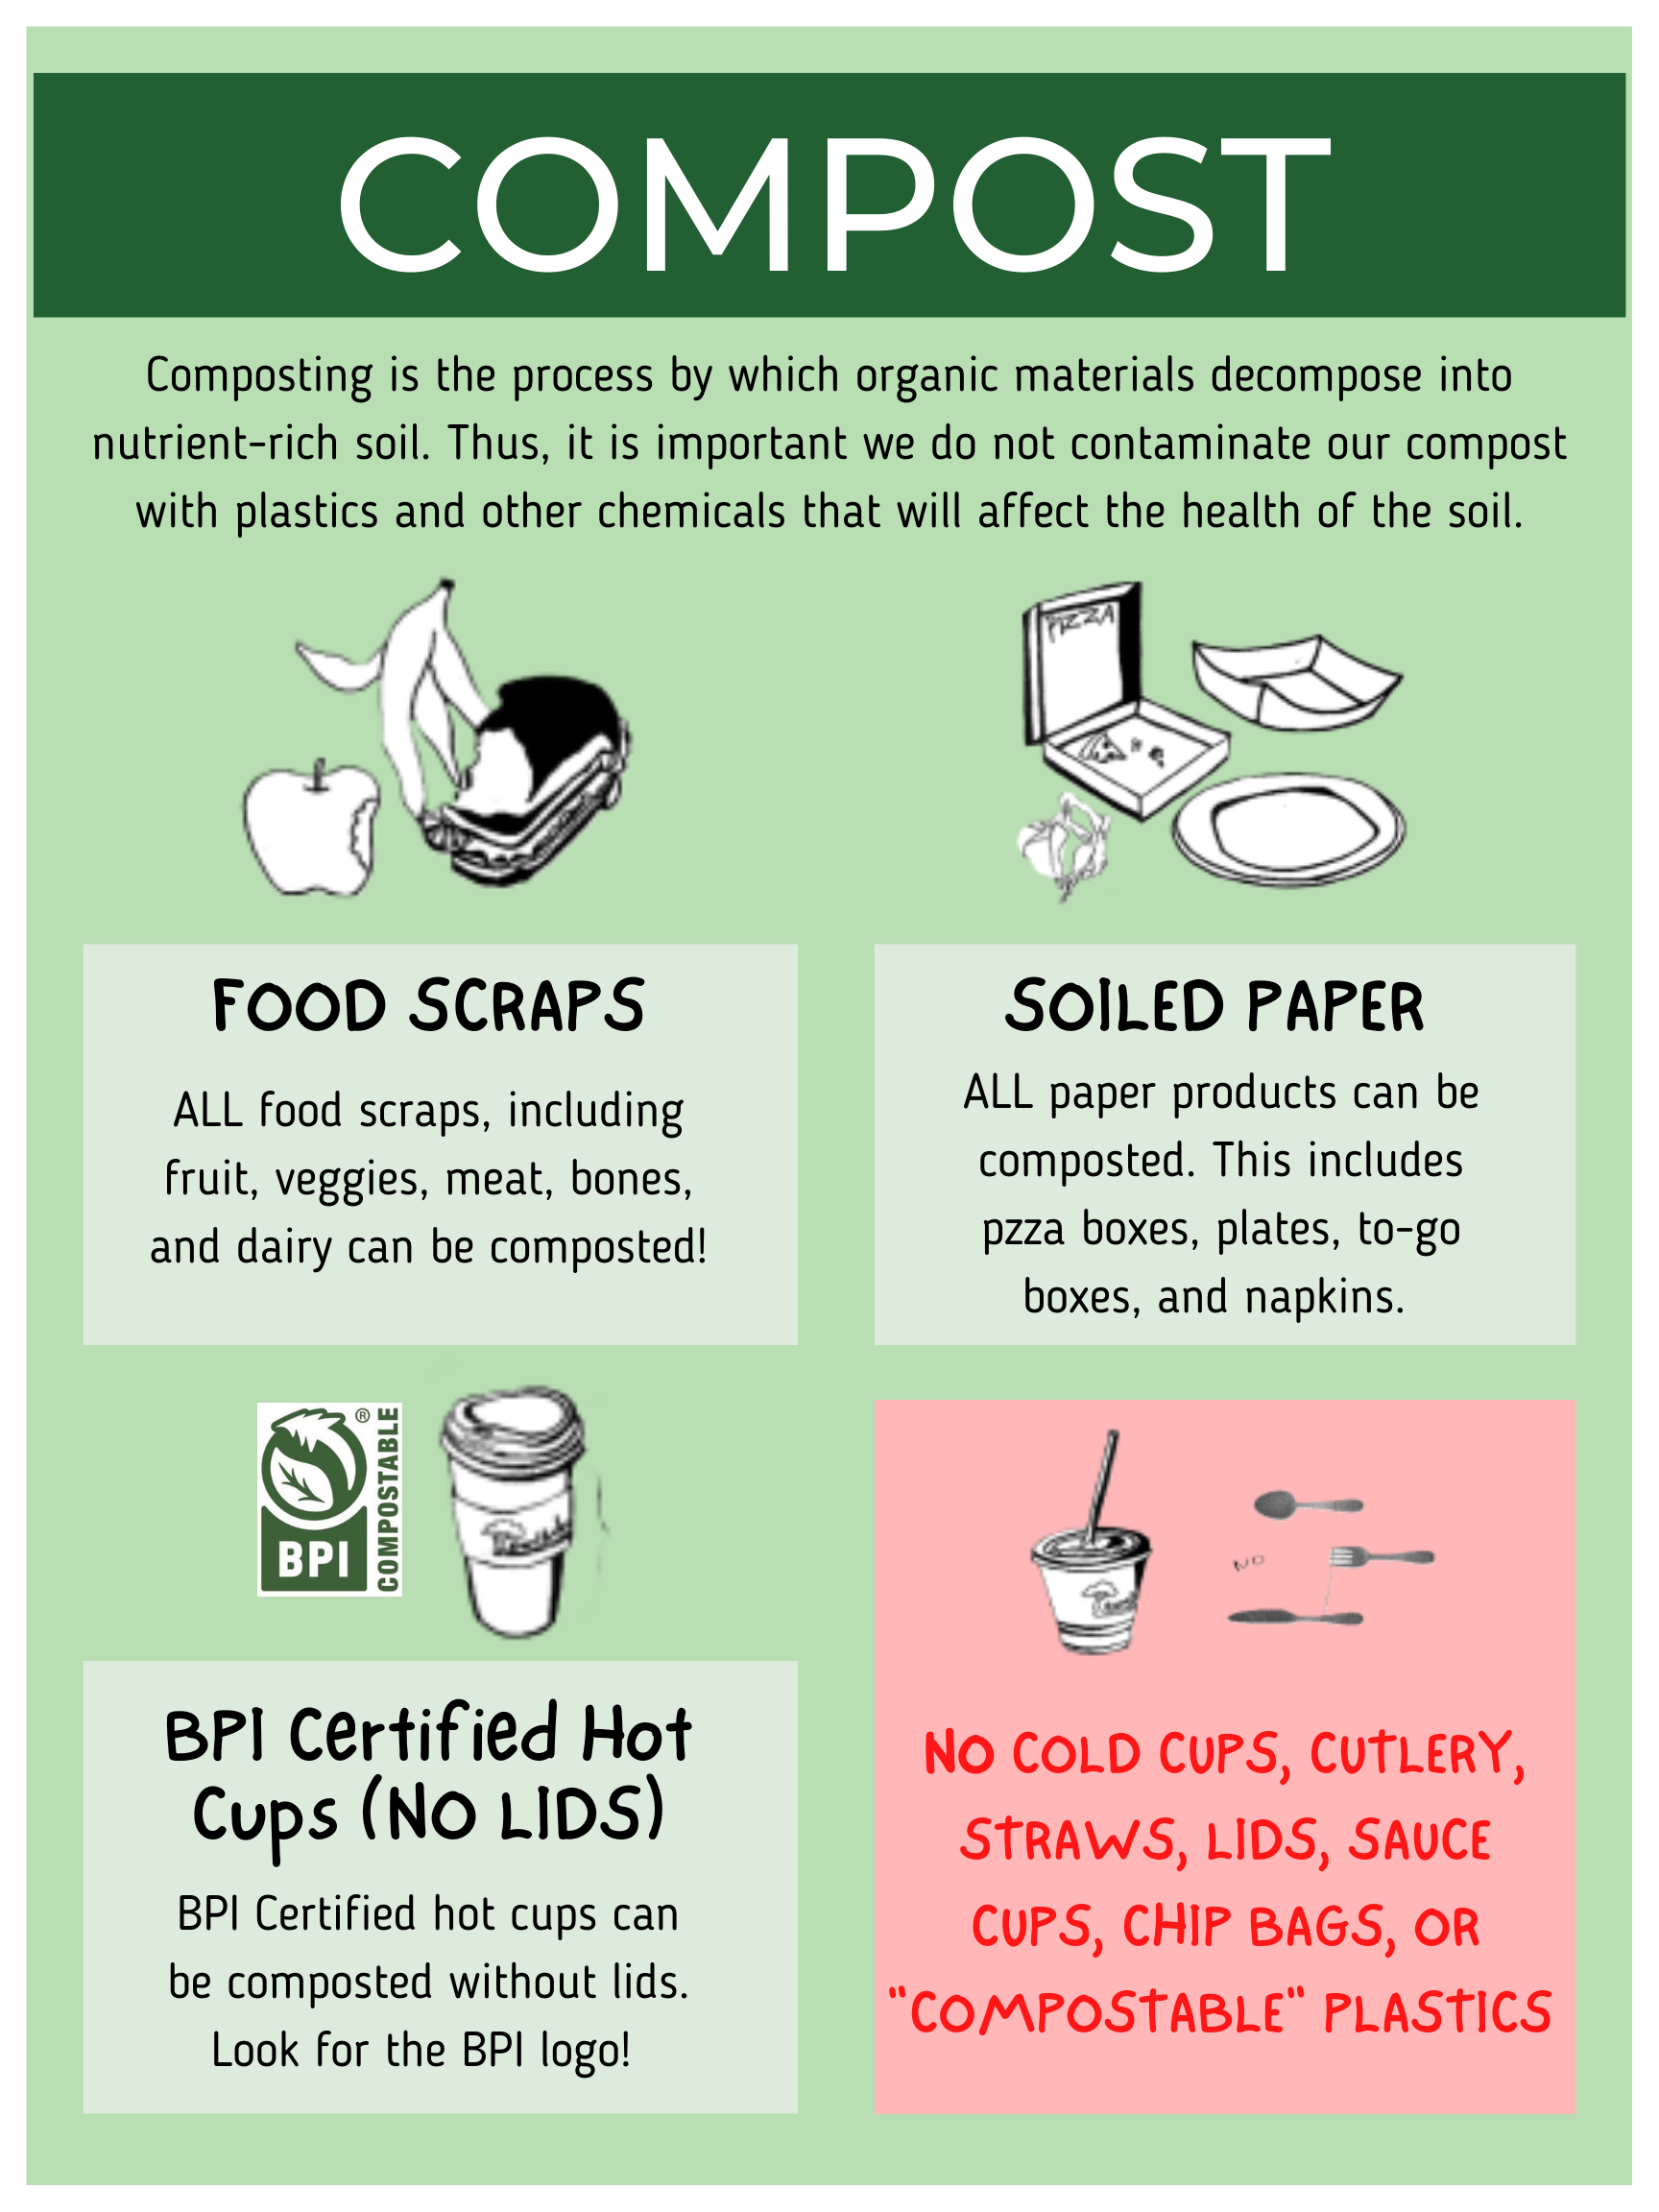 Poster detailing what can and cannot be composted on campus